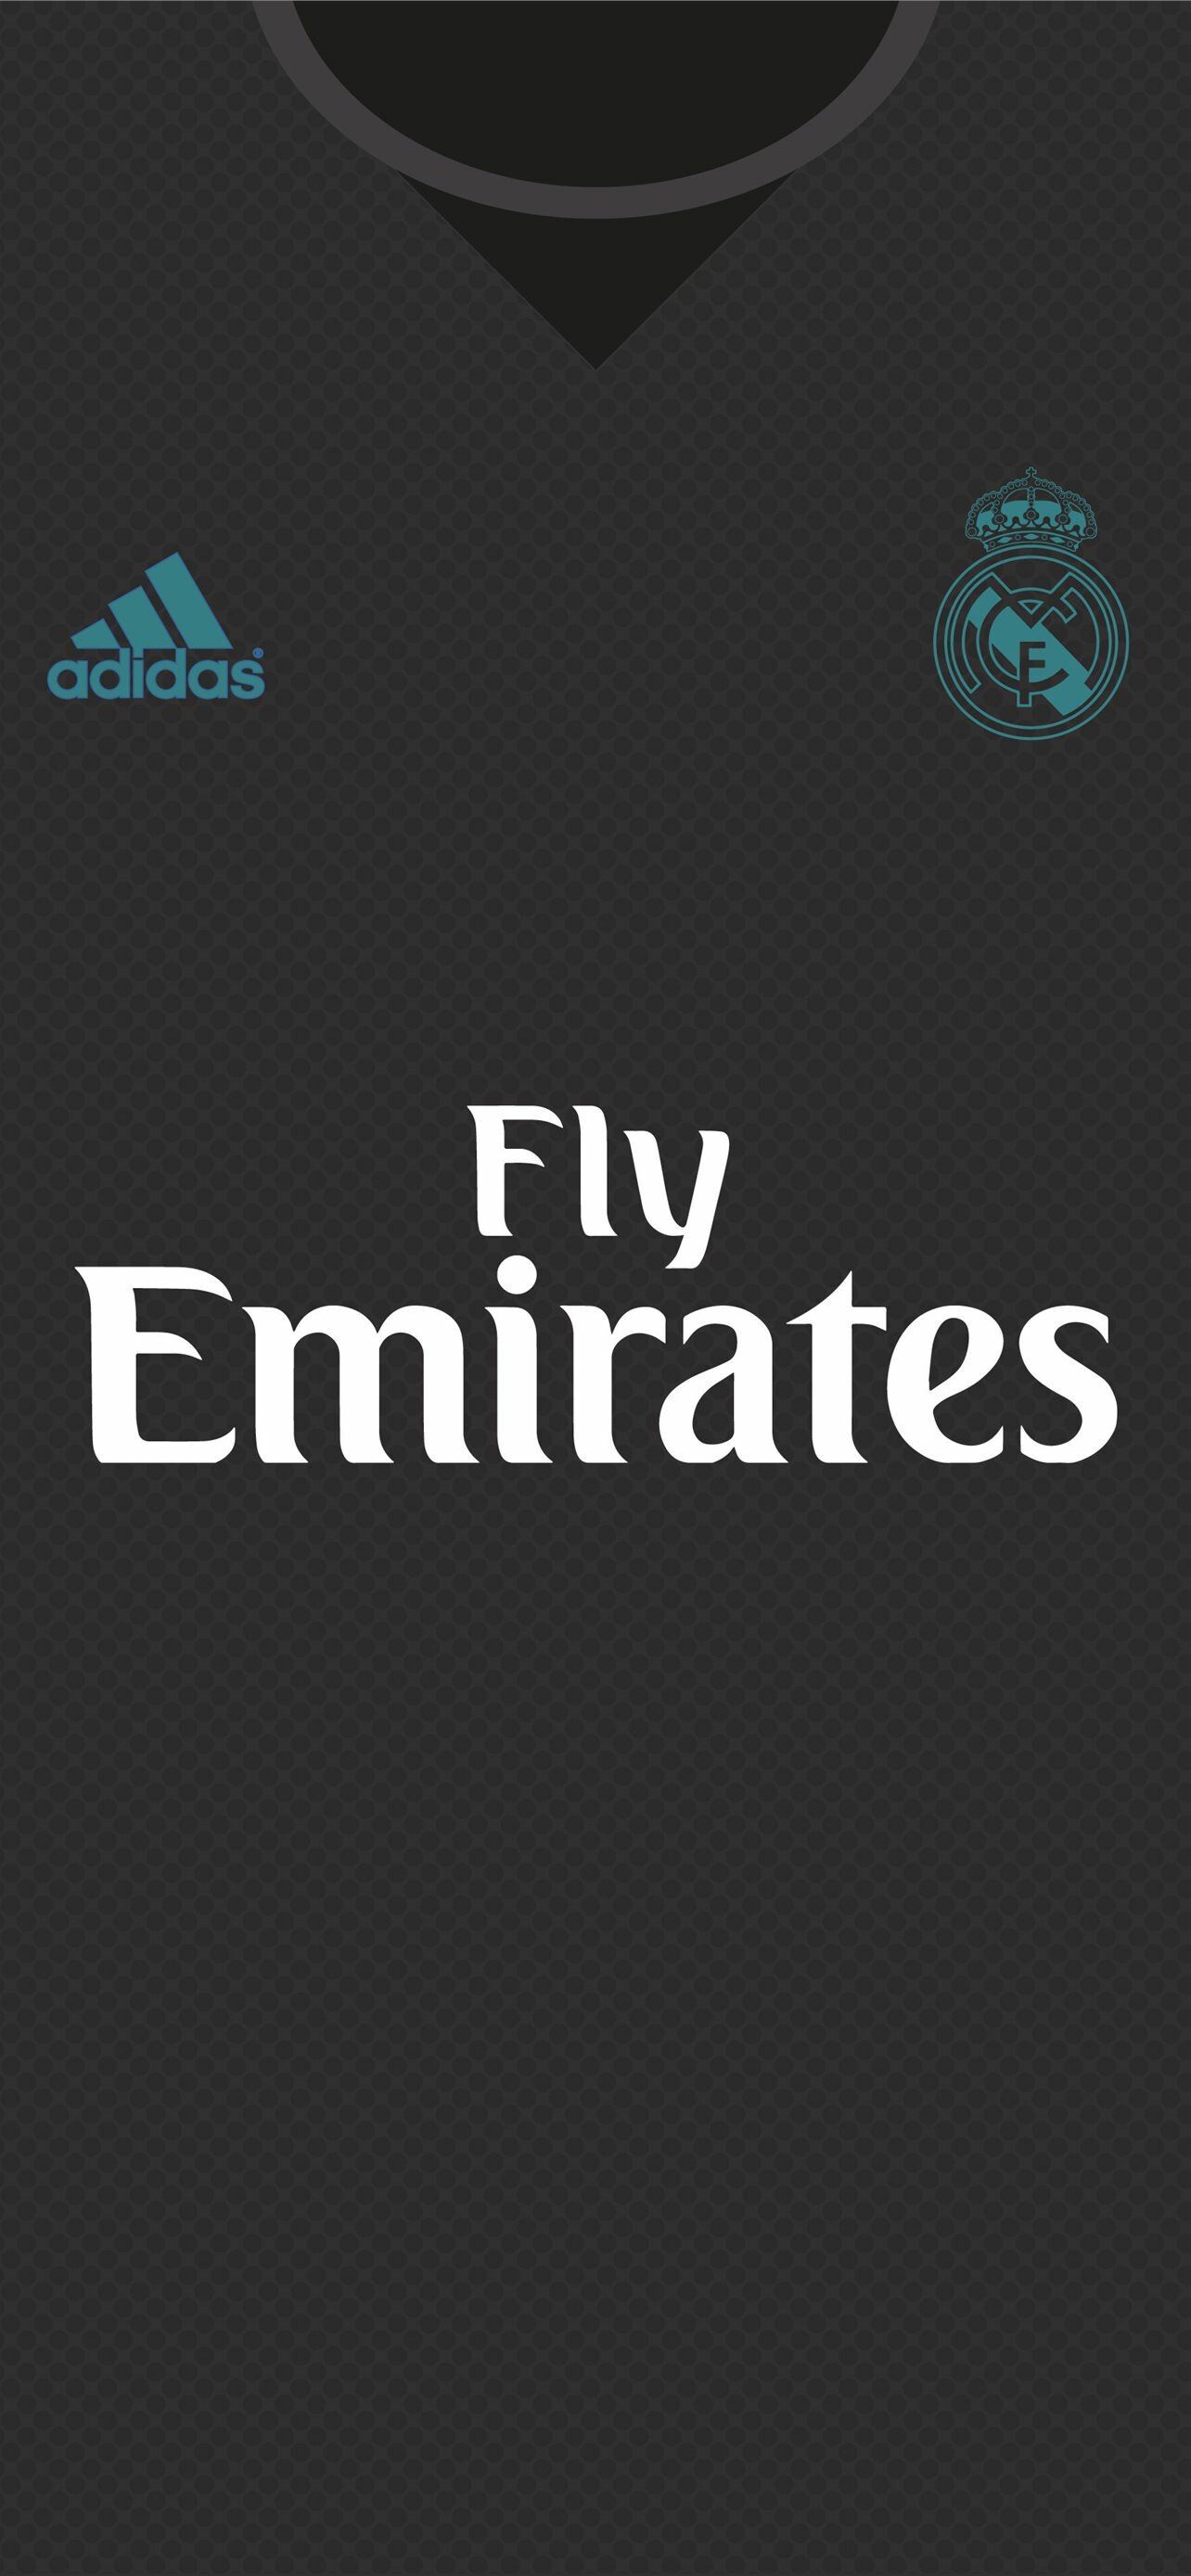 Latest Adidas iPhone wallpapers, Iconic brand logo, Stylish designs, High-quality graphics, 1290x2780 HD Phone